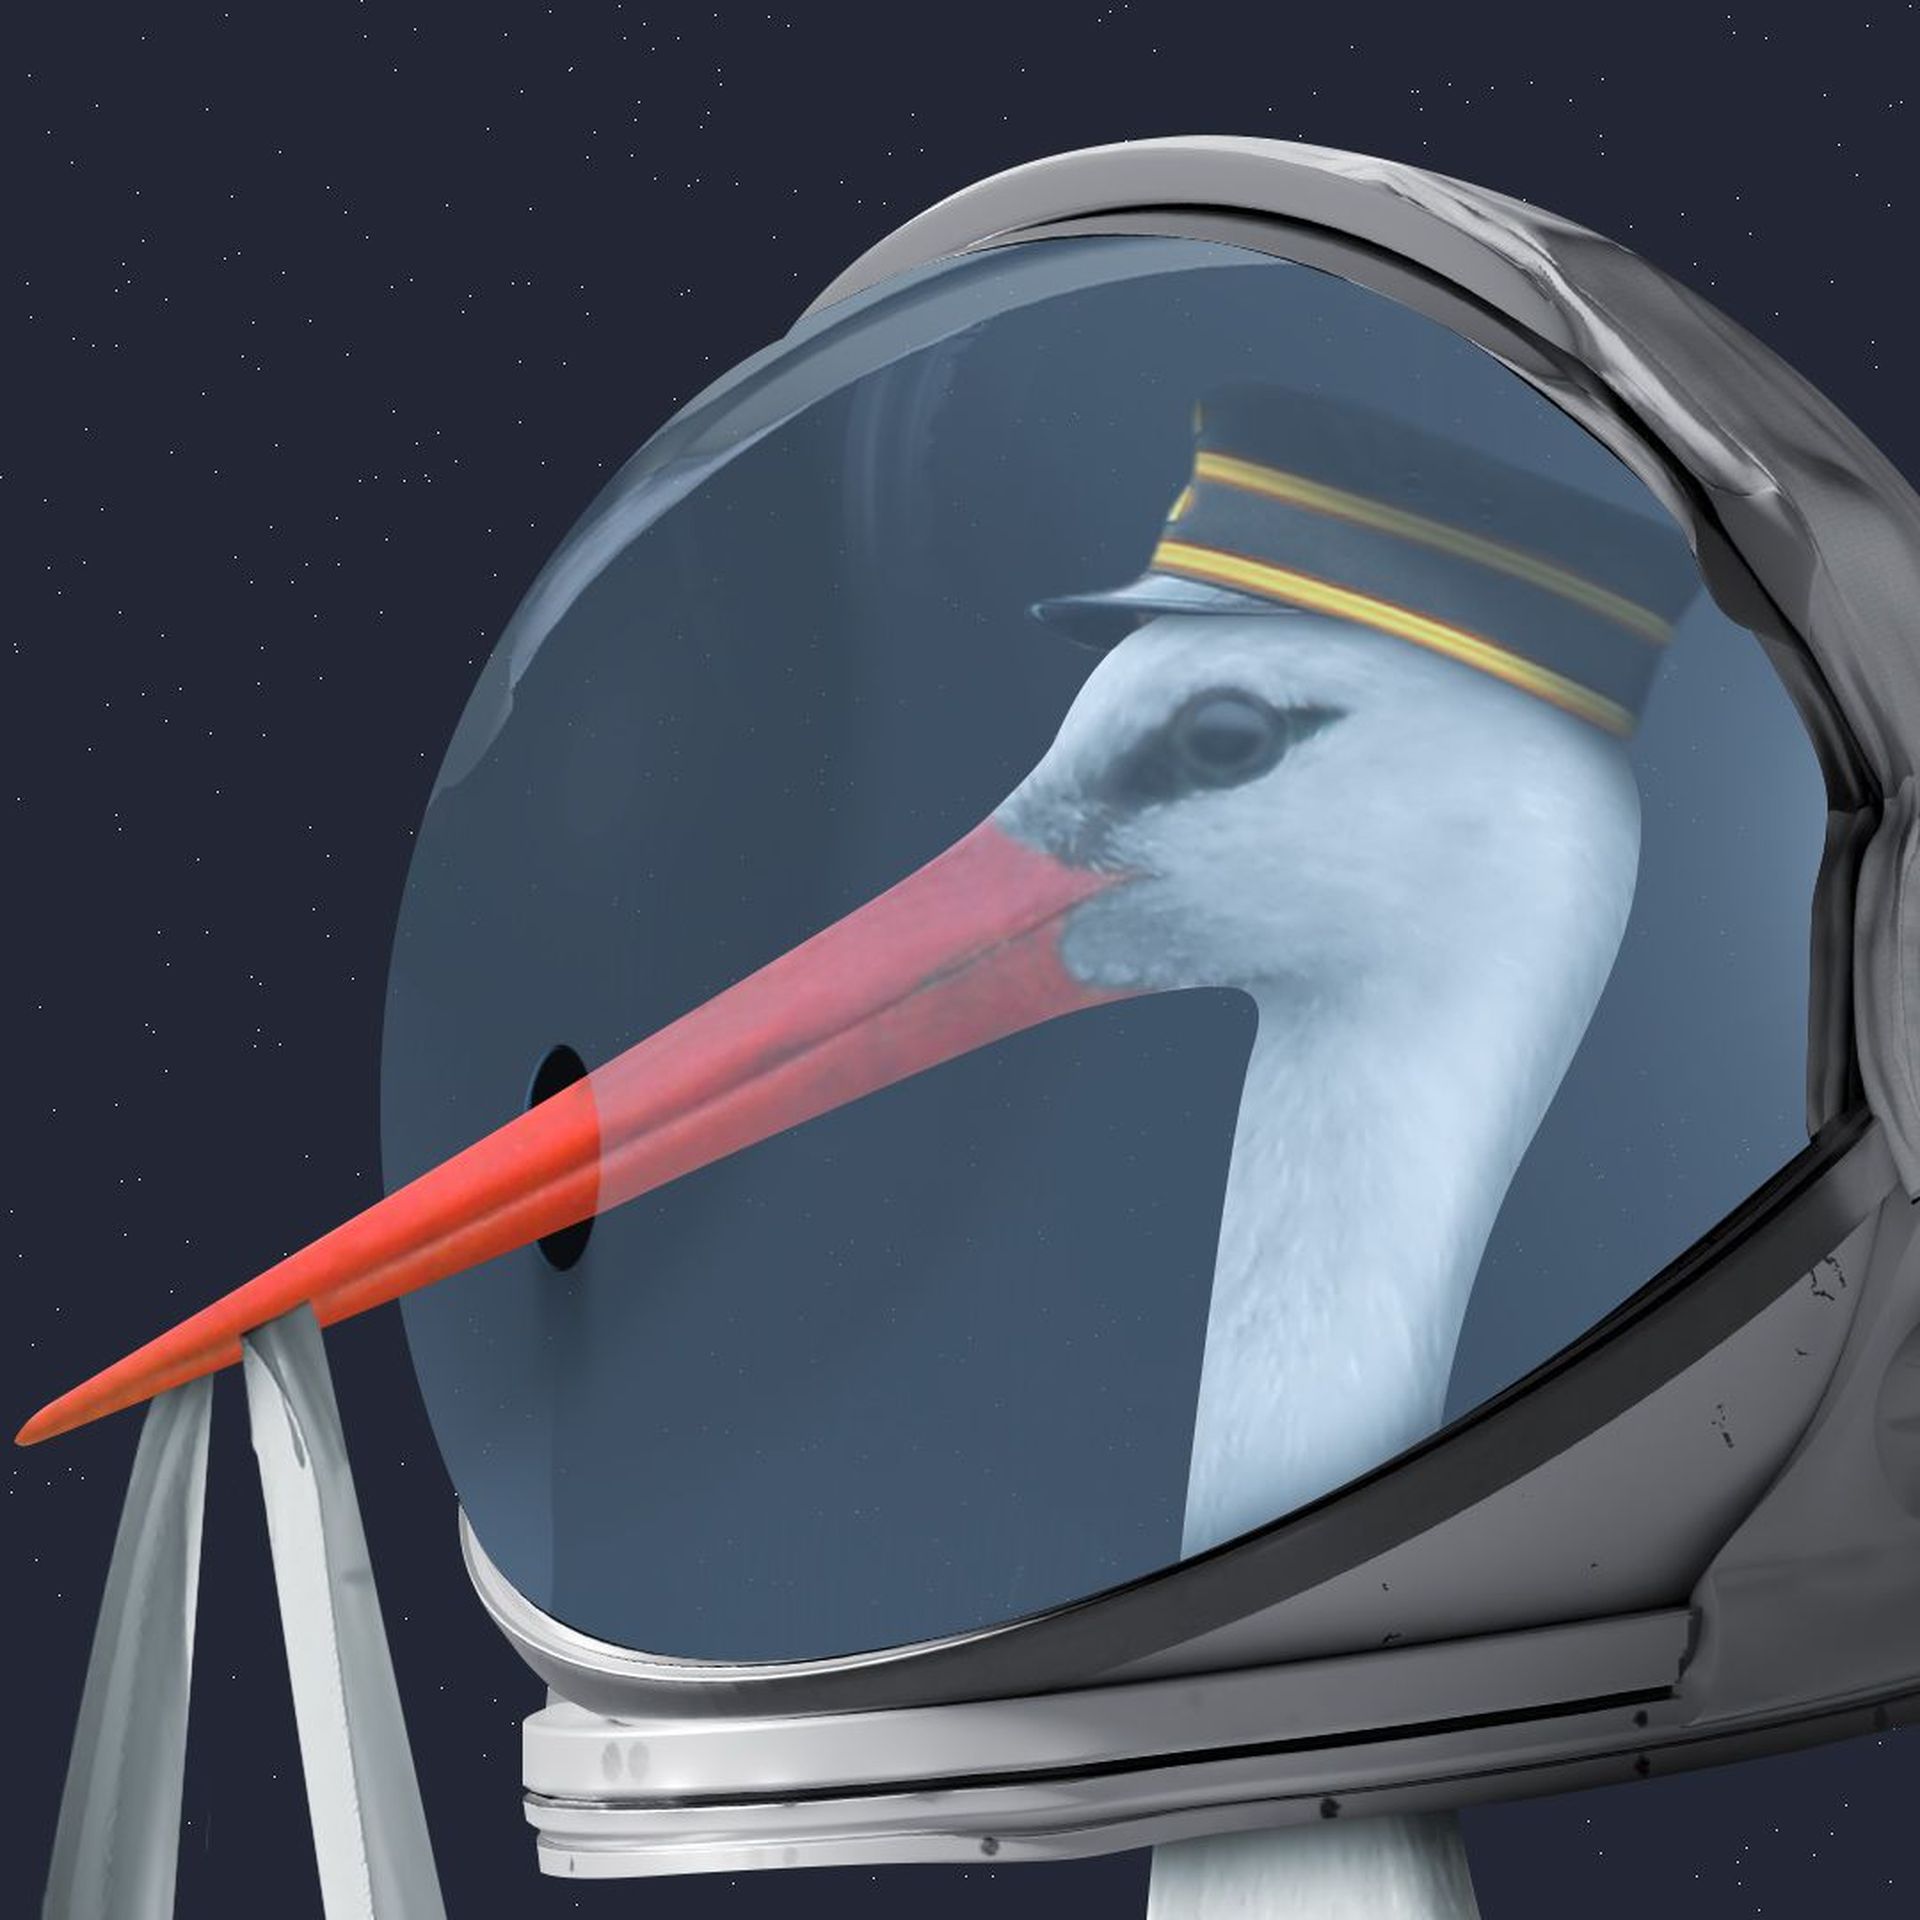 Illustration of a stork carrying a baby bundle and wearing an astronaut helmet. The helmet has a small hole in the visor for the stork's beak to fit through.